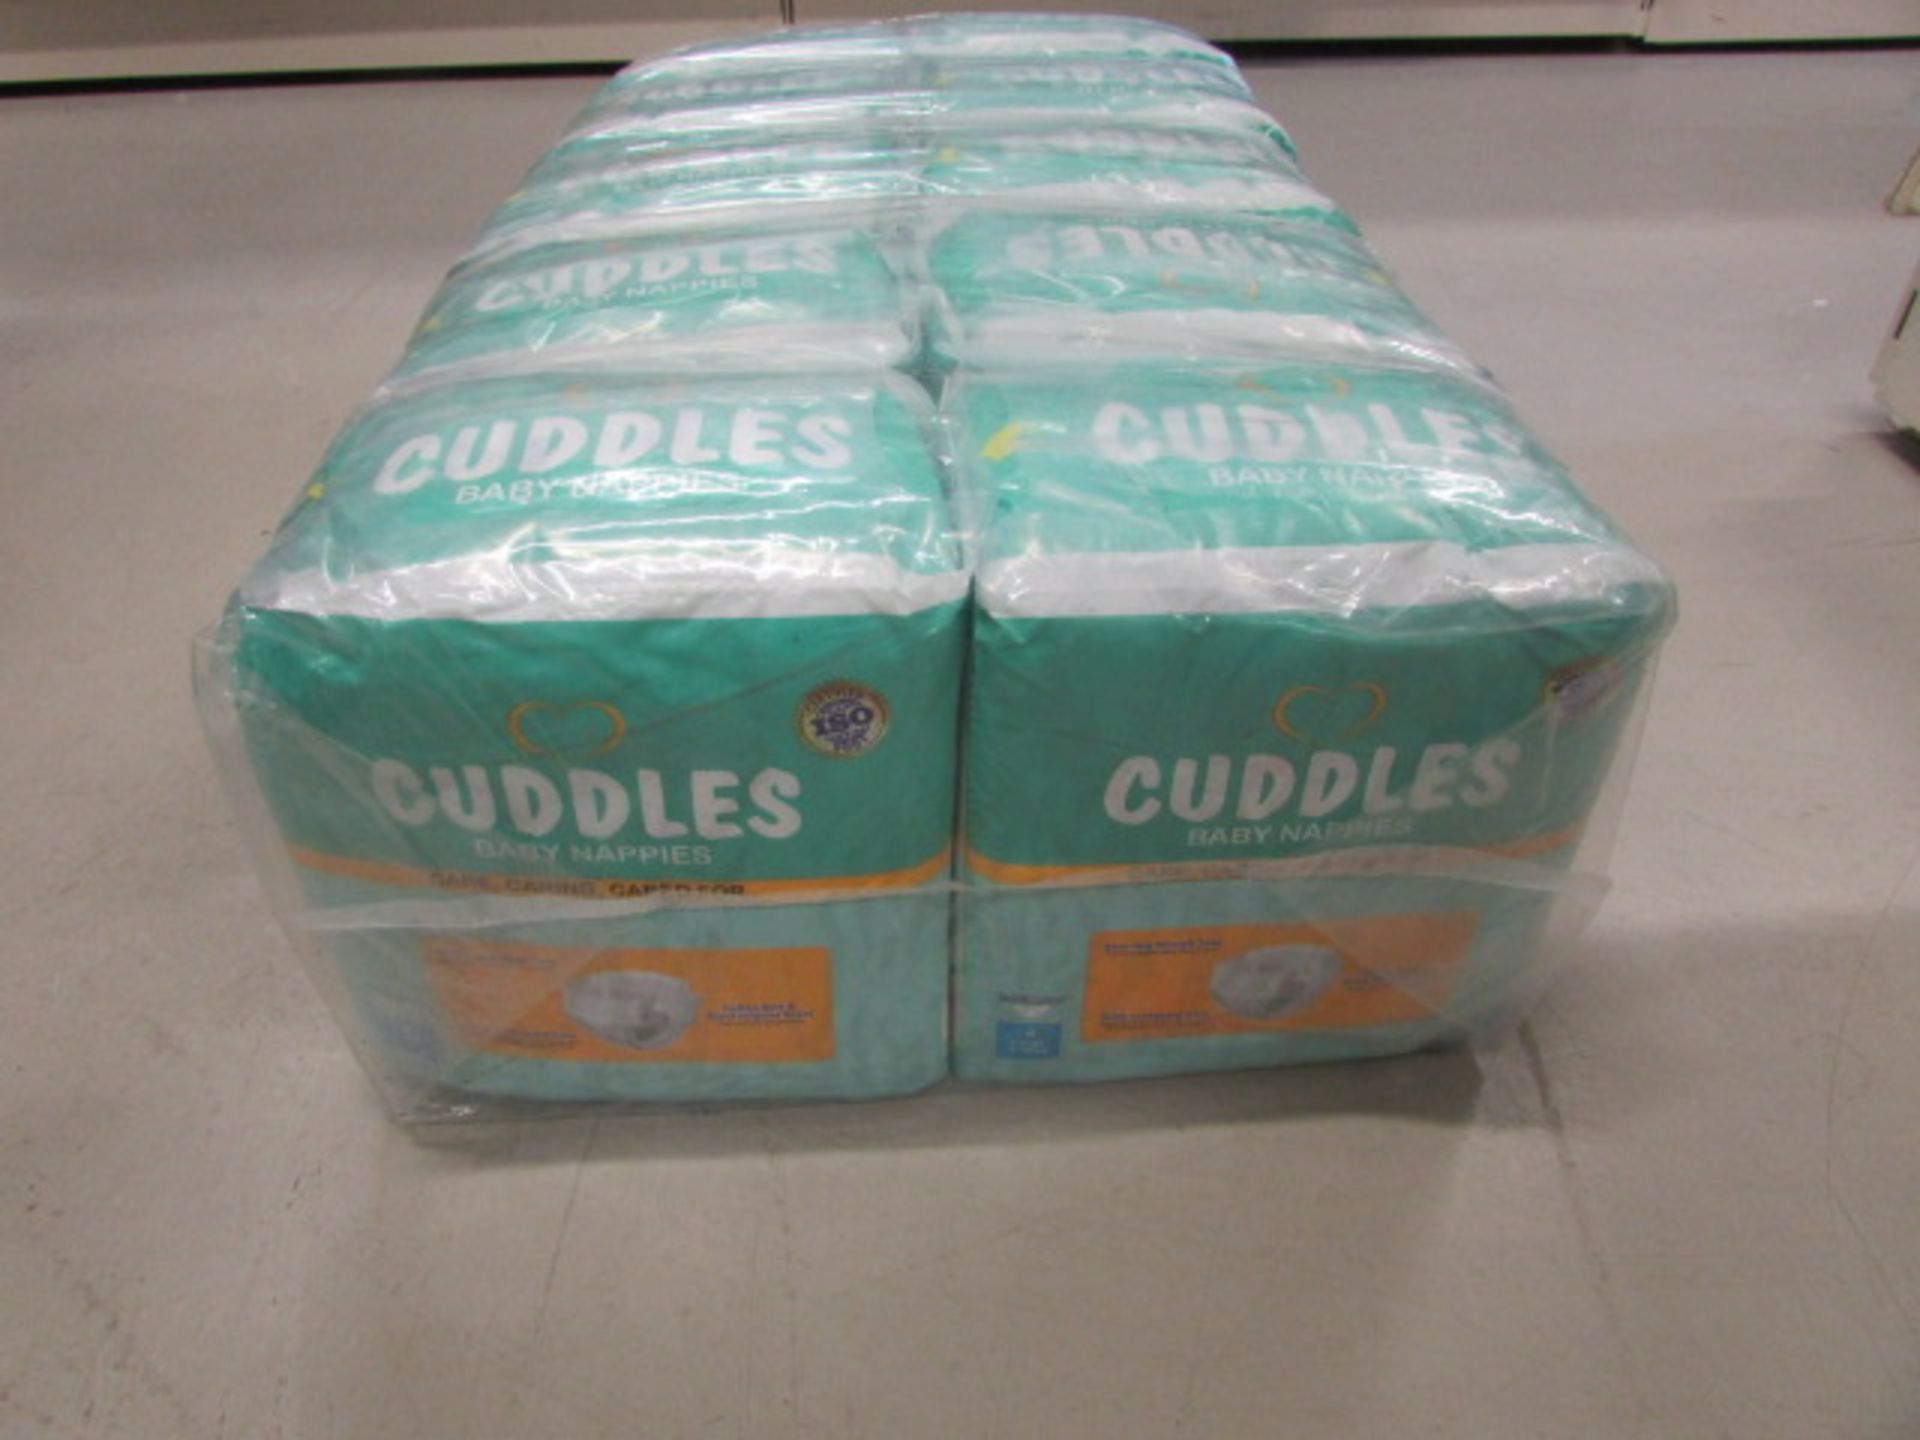 1 x Outer Carton, 10 Packs In An Outer, 18 Nappies in A Pack (180 Nappies In Total) [Size 4]